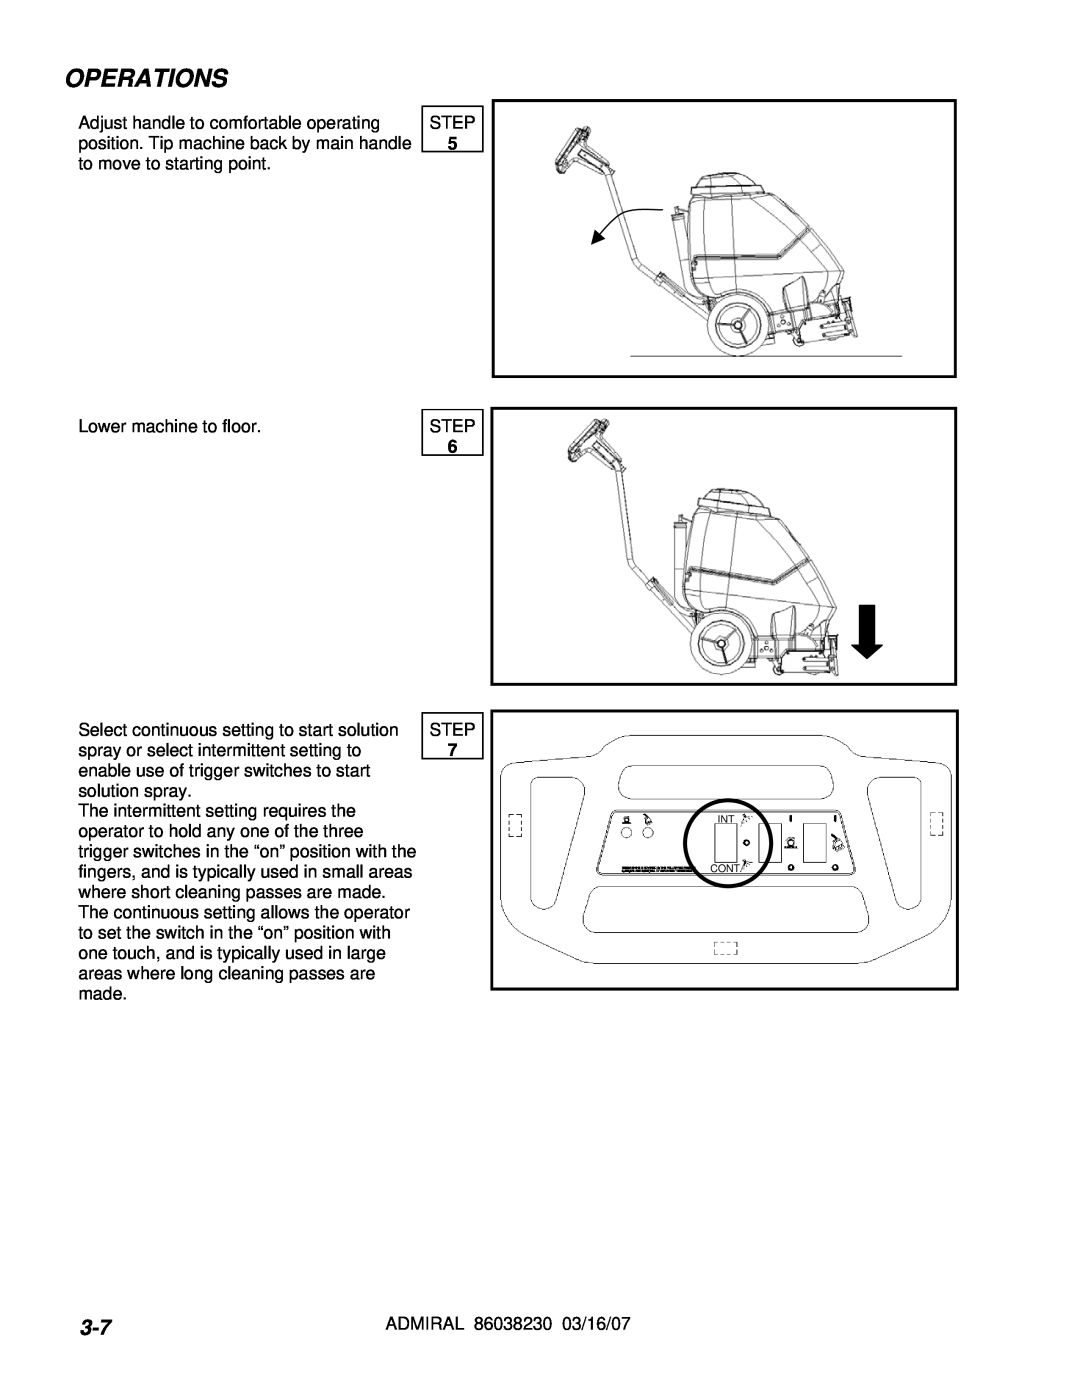 Windsor ADM8, 10080170 operating instructions Operations, Adjust handle to comfortable operating 